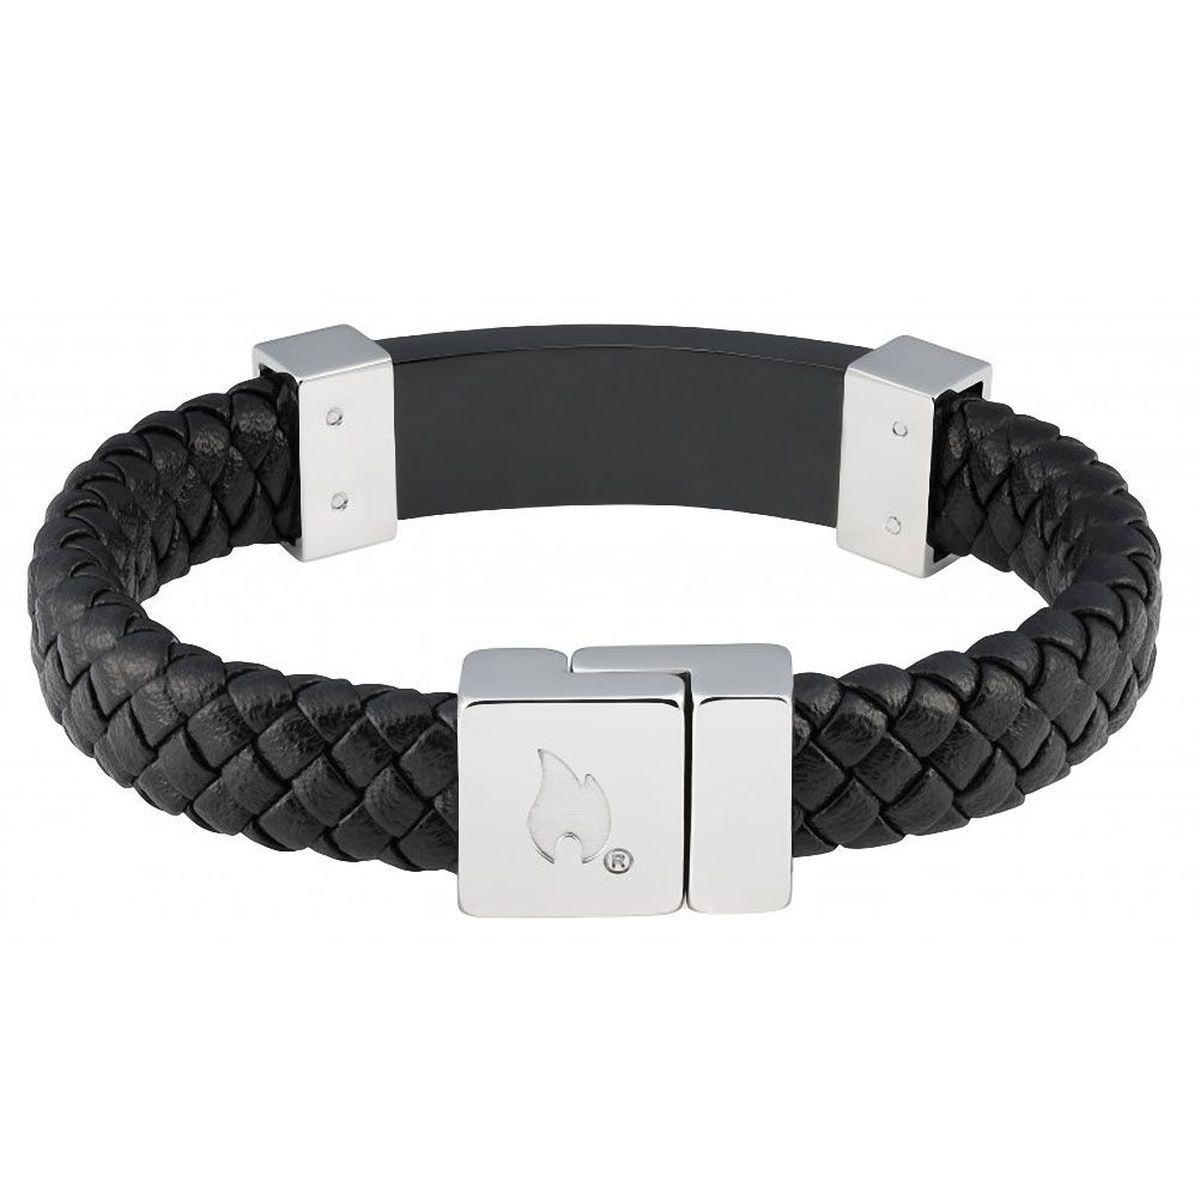 Zippo flat bracelet in braided leather and black and silver stai